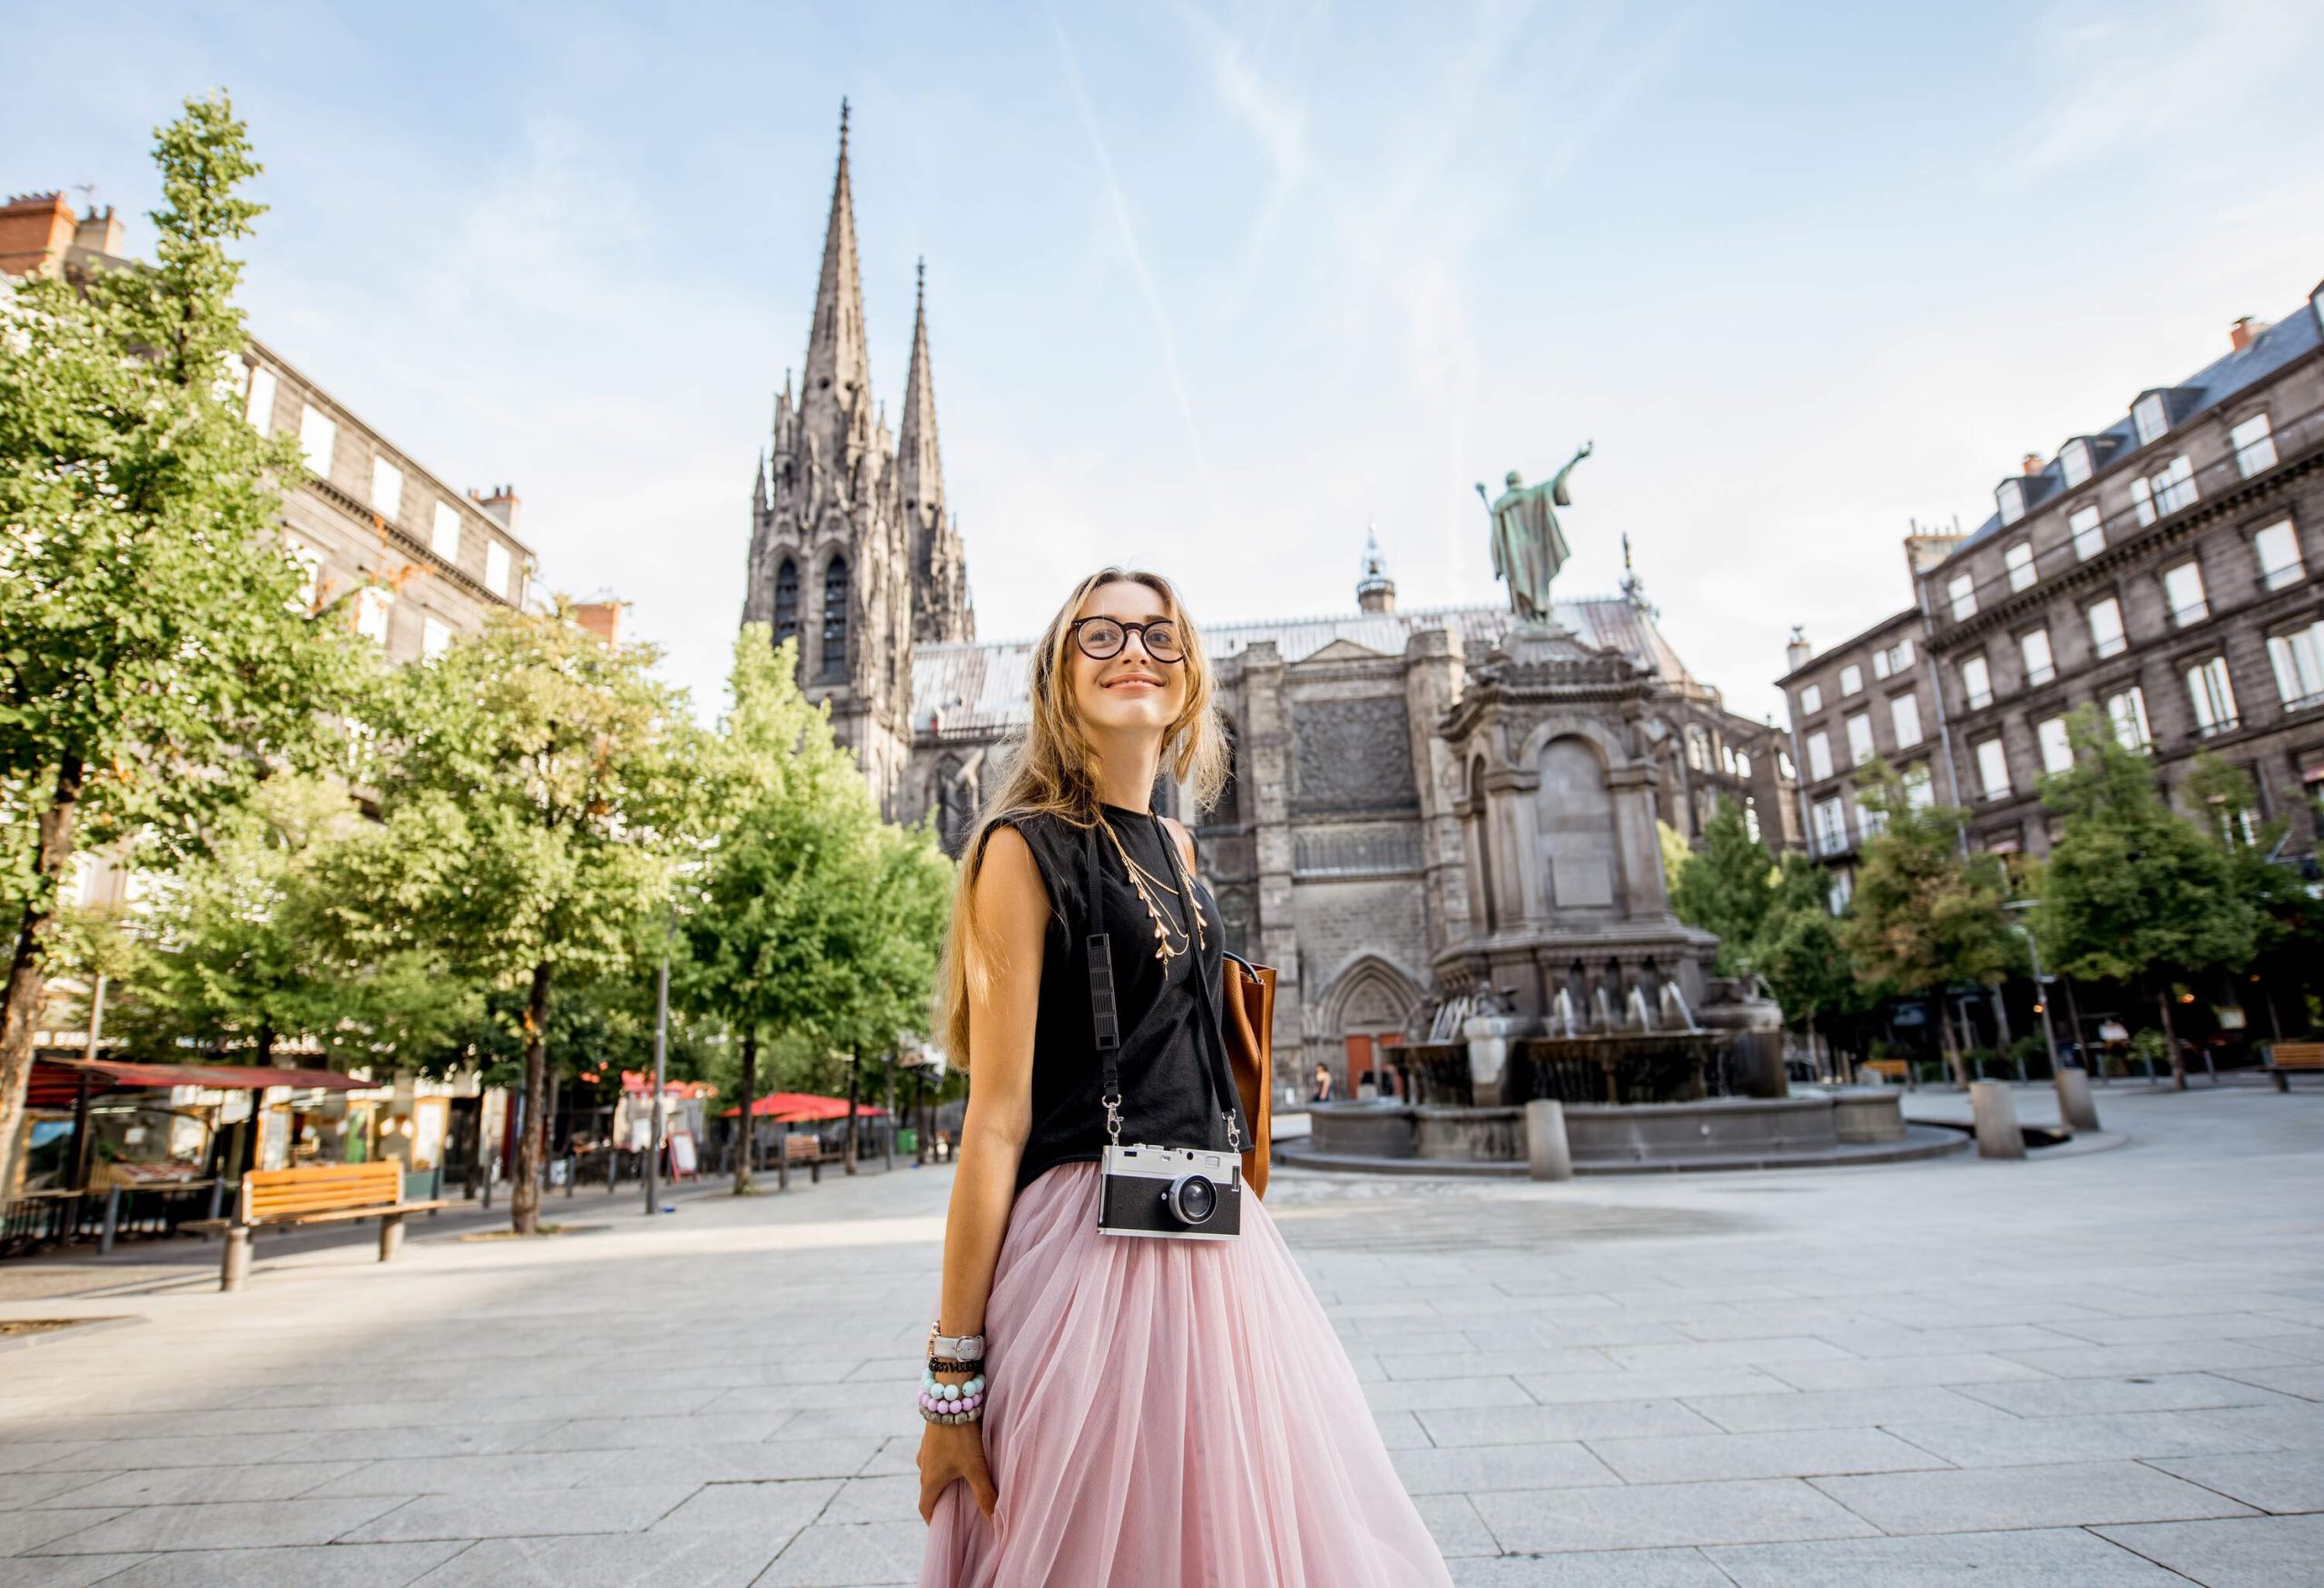 Lifestyle portrait of a woman traveling in front of the famous cathedral in Clermont-Ferrand city in France